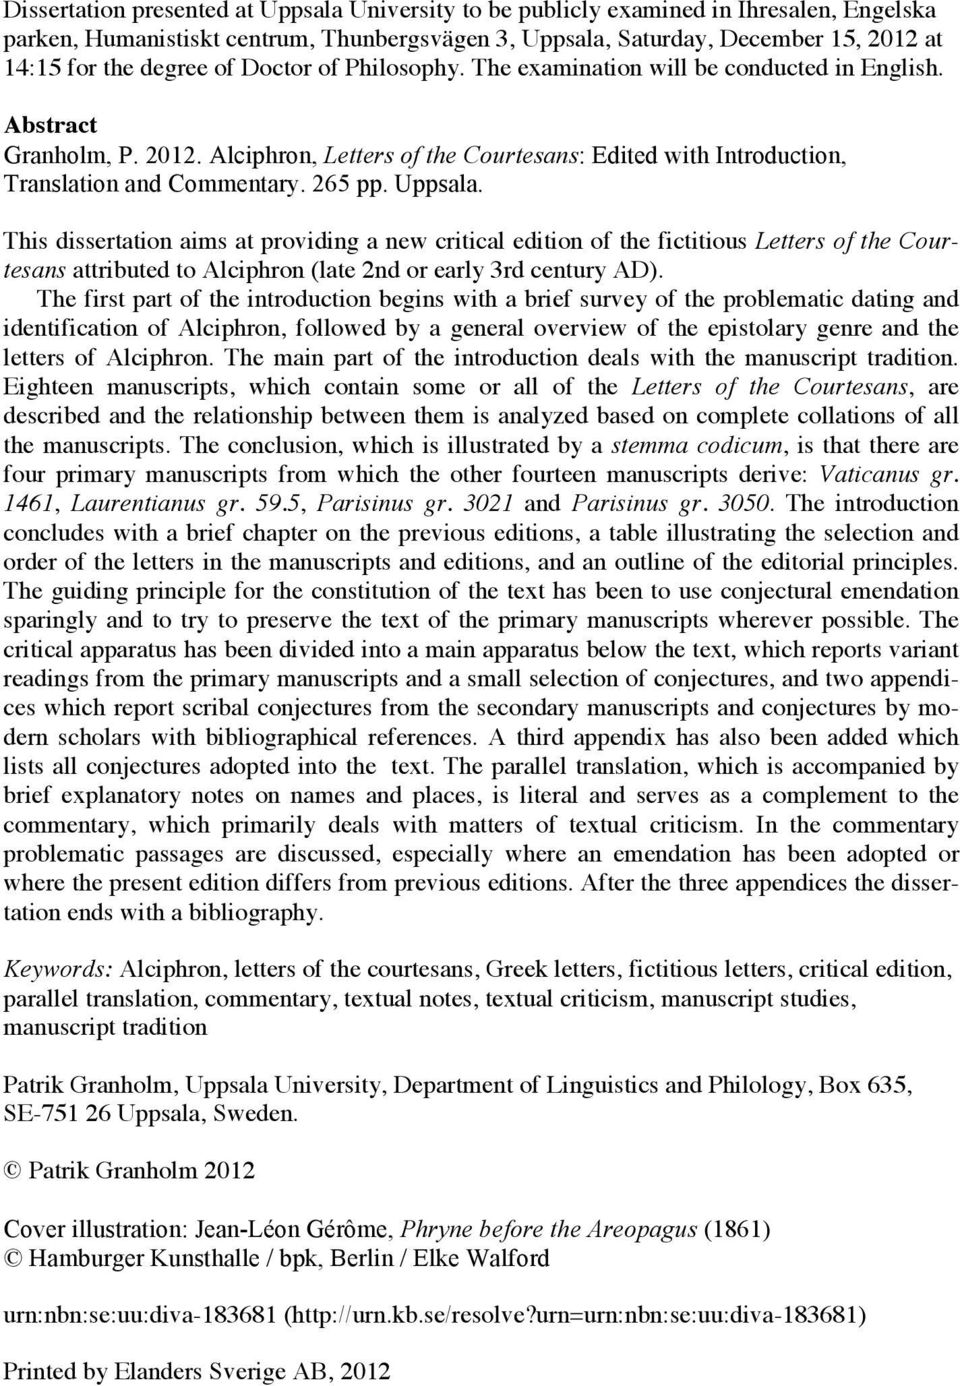 265 pp. Uppsala. This dissertation aims at providing a new critical edition of the fictitious Letters of the Courtesans attributed to Alciphron (late 2nd or early 3rd century AD).